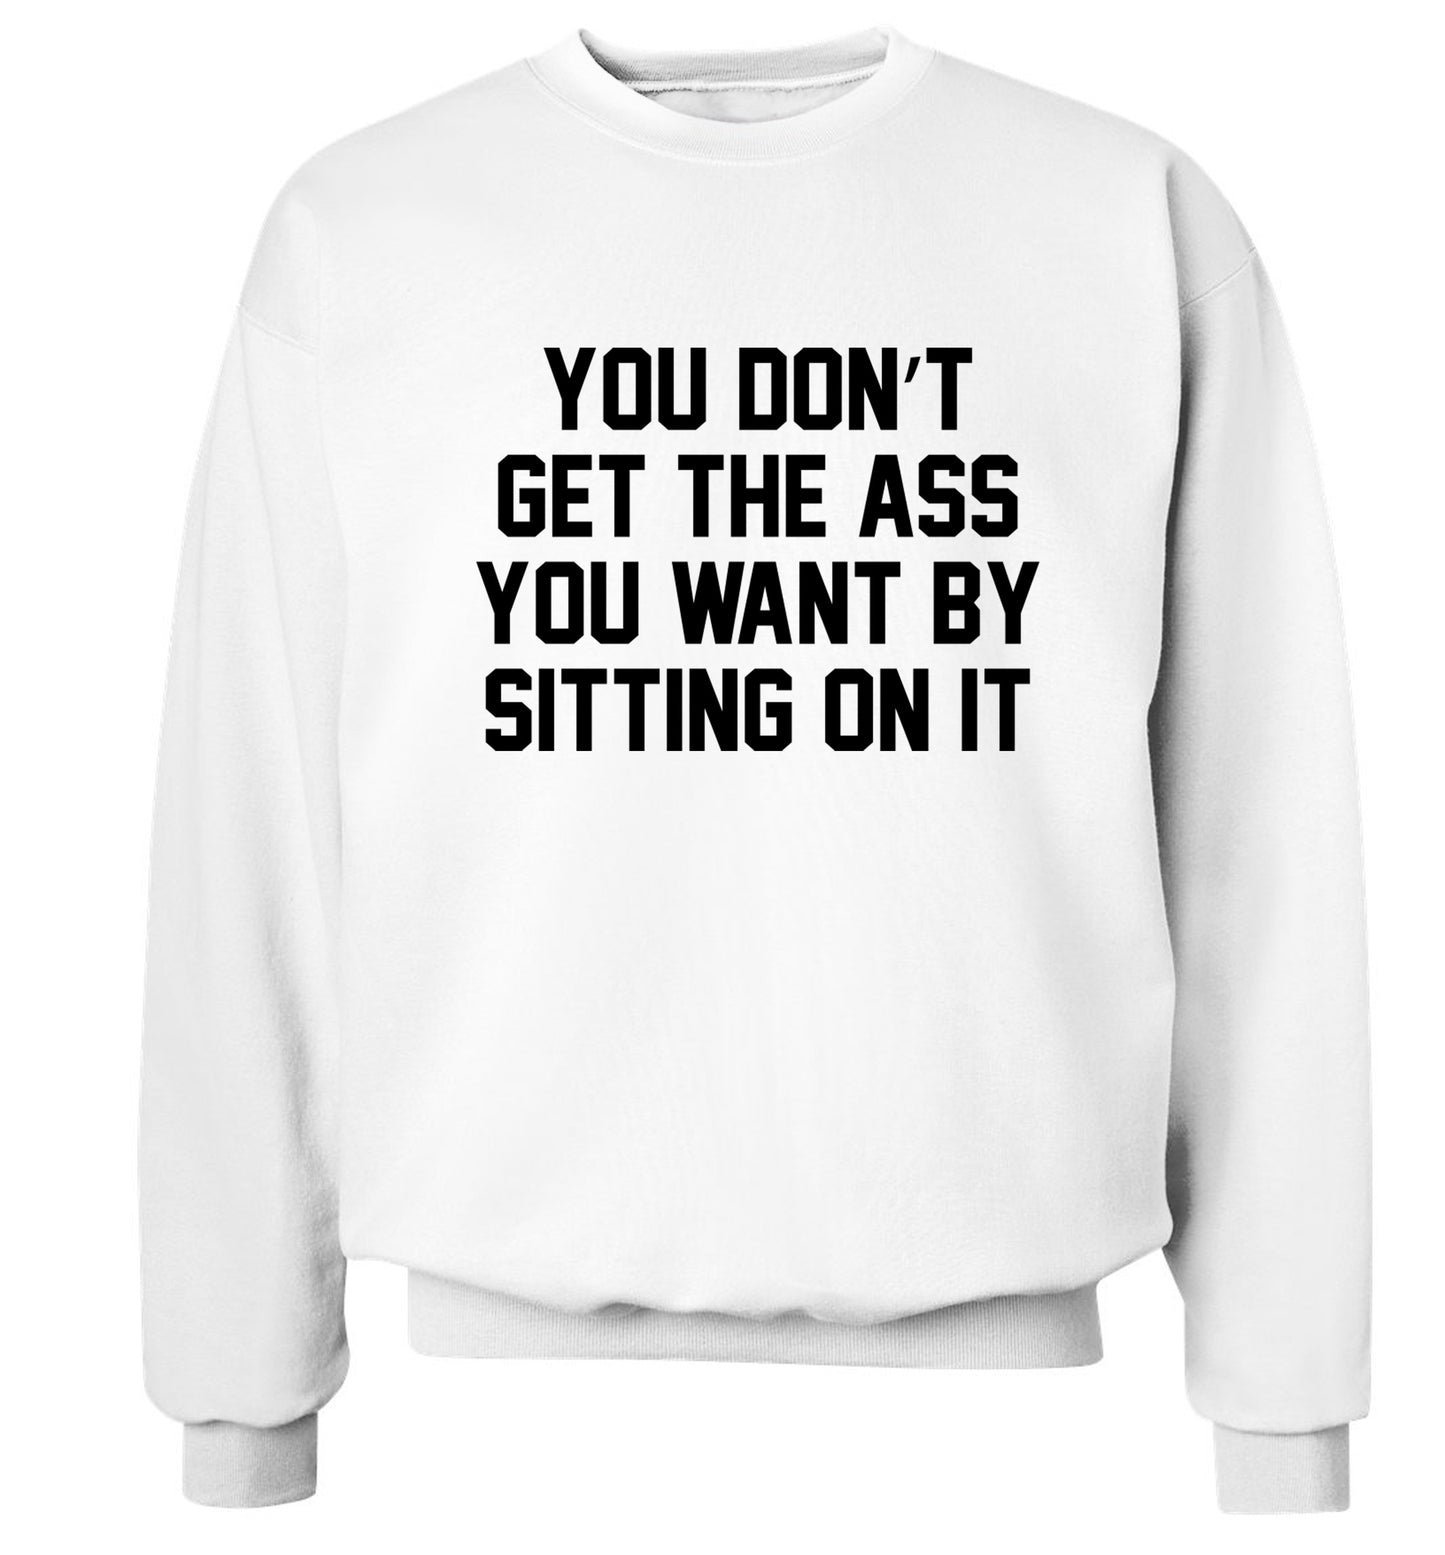 You don't get the ass you want by sitting on it Adult's unisex white Sweater 2XL